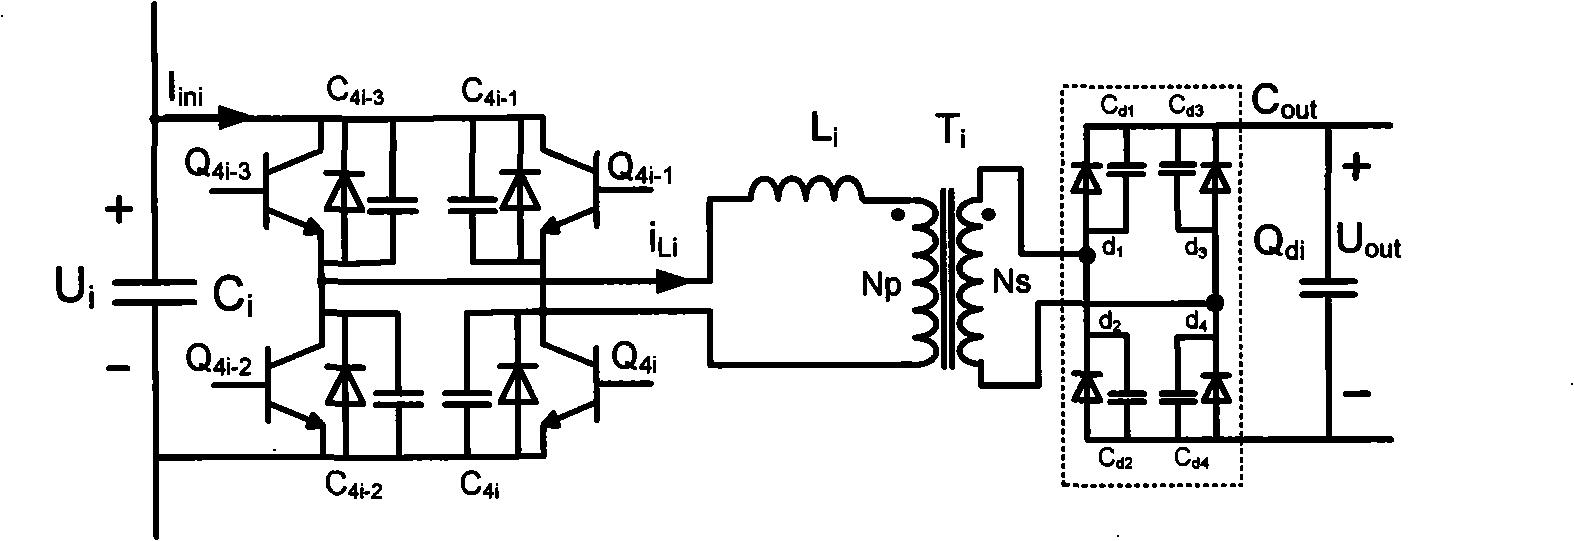 Input-series-output-parallel automatic voltage equalizing DC transformer based on full-bridge topological structure